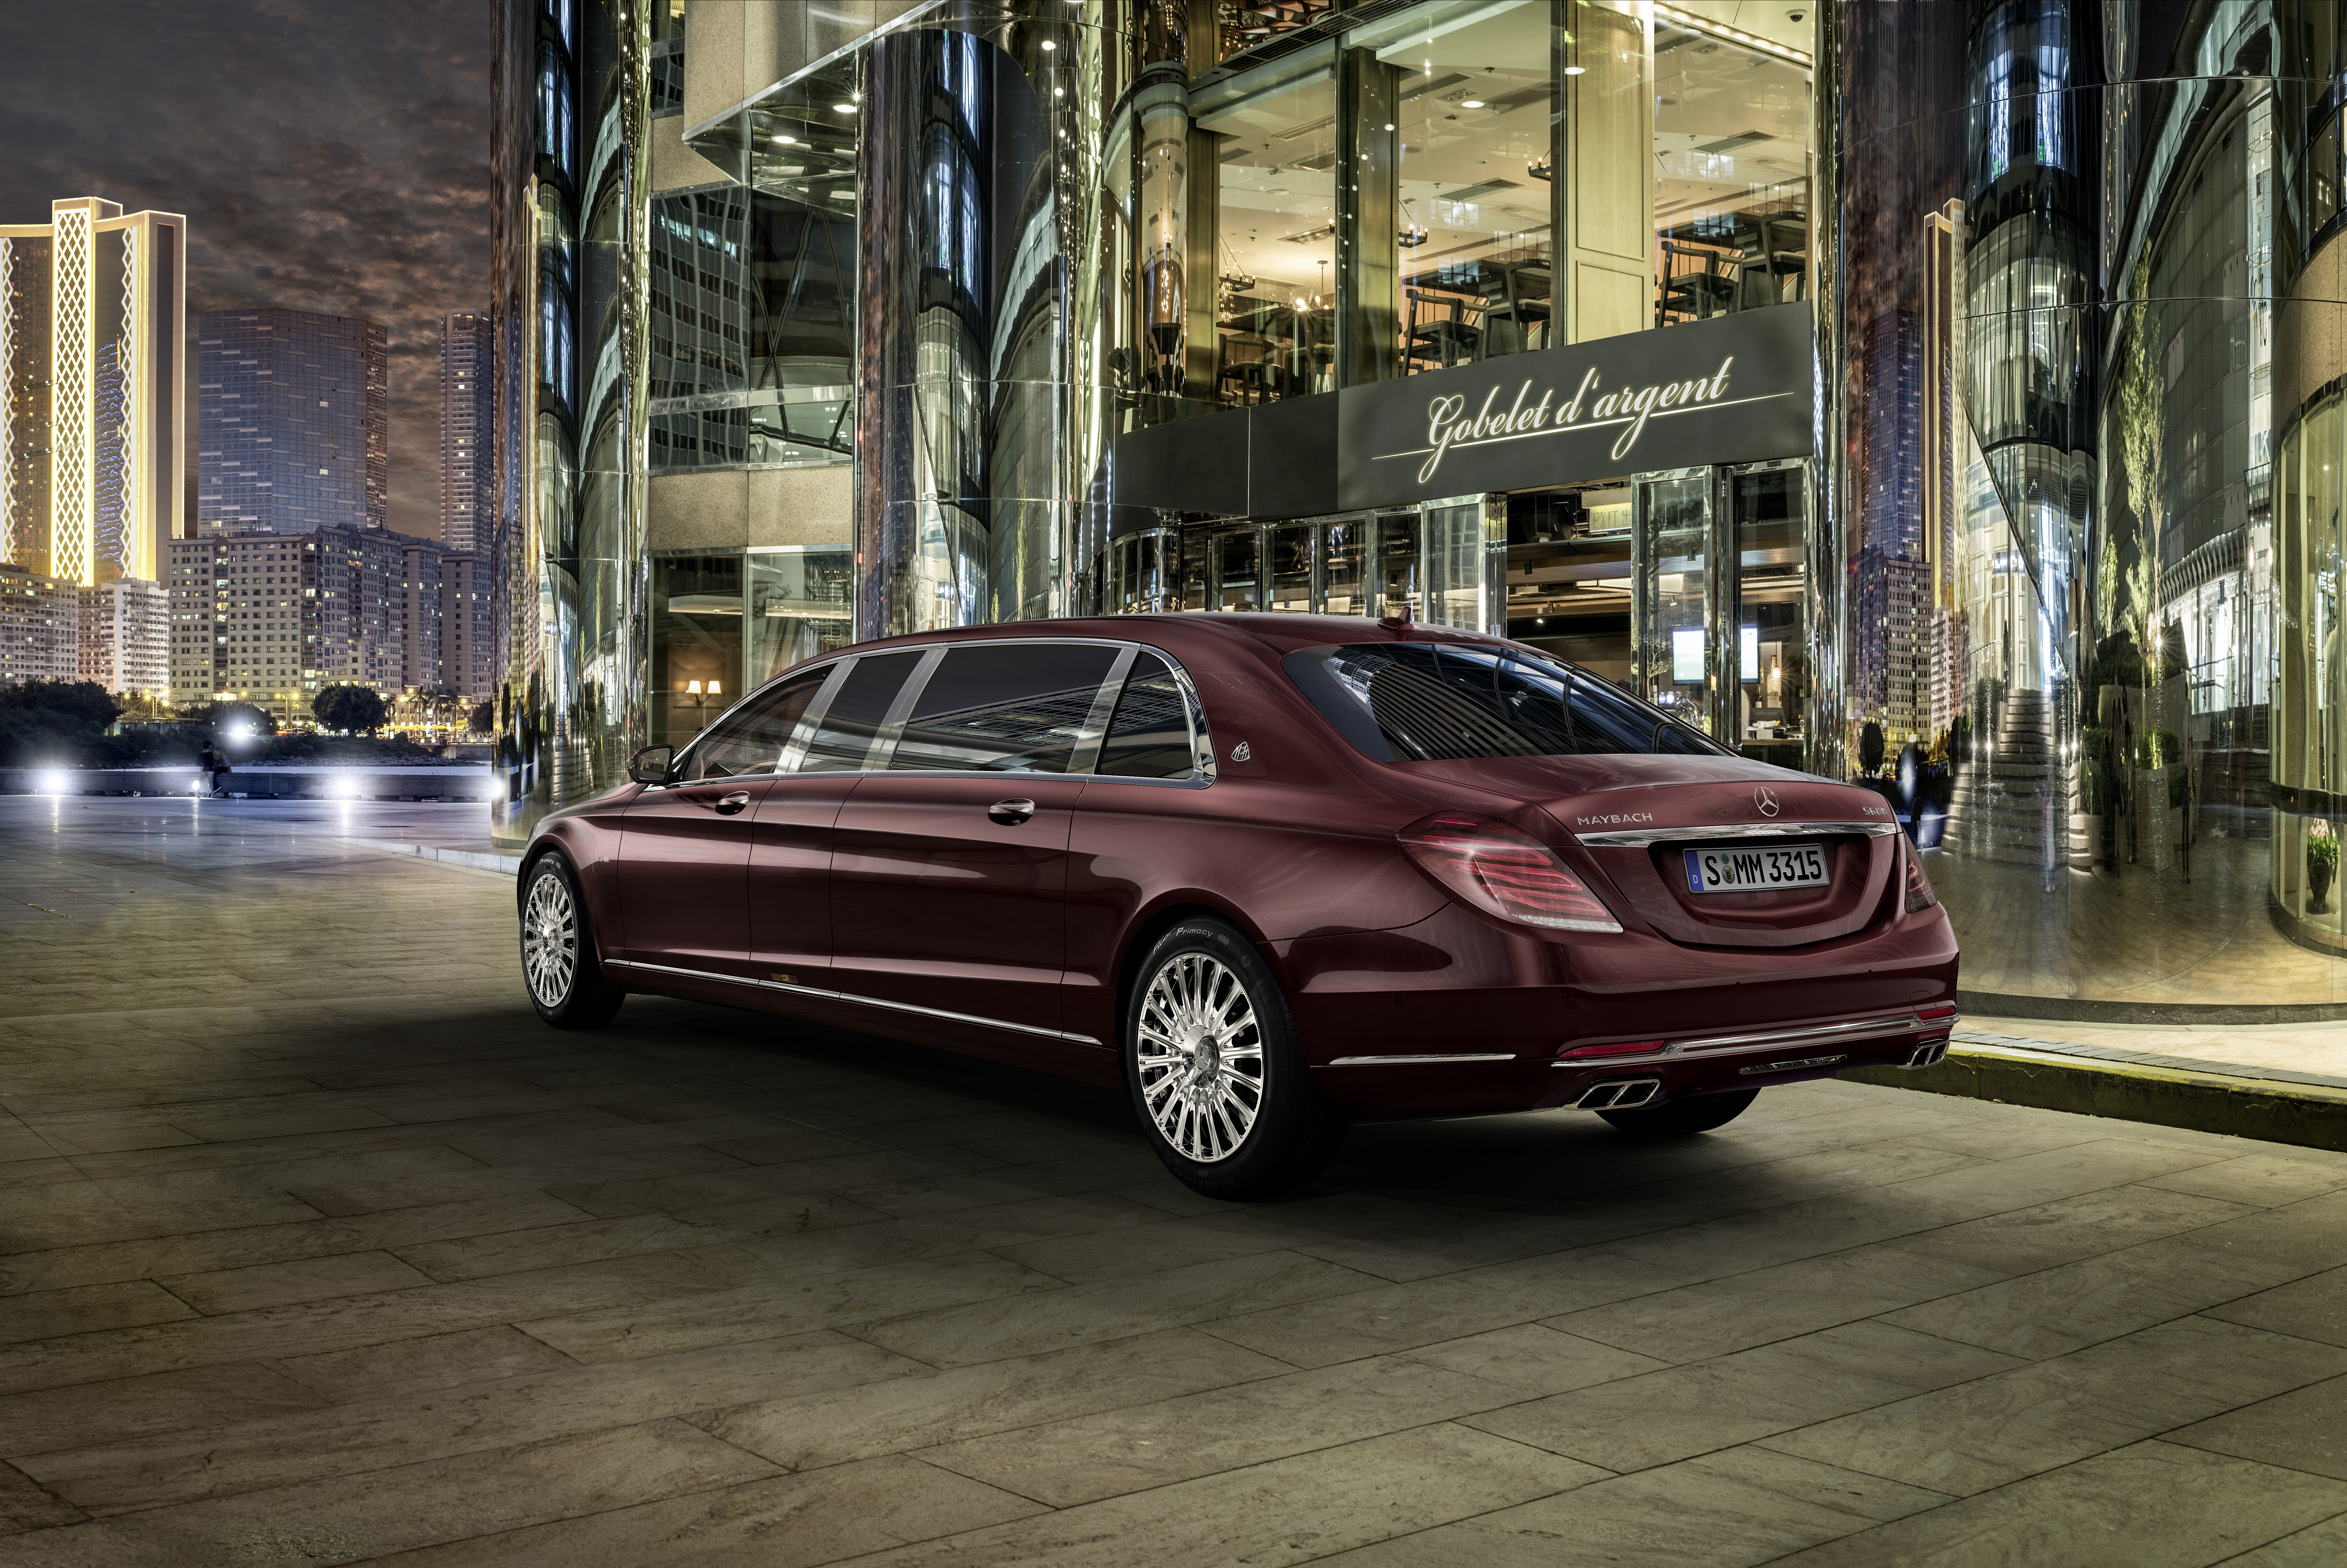 Mercedes benz maybach 600. Мерседес Майбах s600 Pullman. Mercedes Benz Maybach s600. Мерседес-Бенц Майбах s-klasse. Mercedes s class Maybach s600.